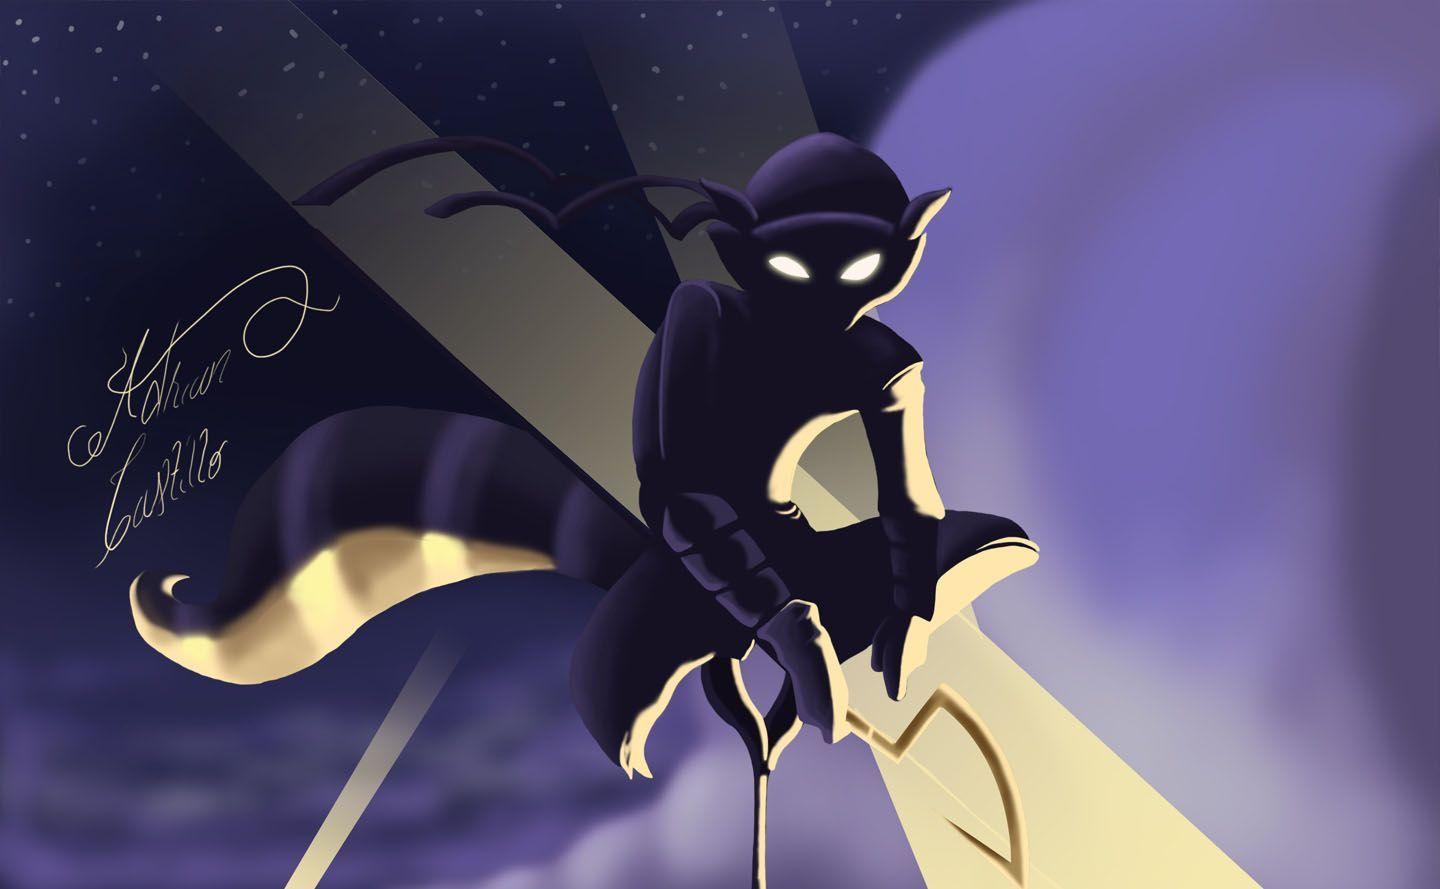 Sly Cooper Wallpapers.